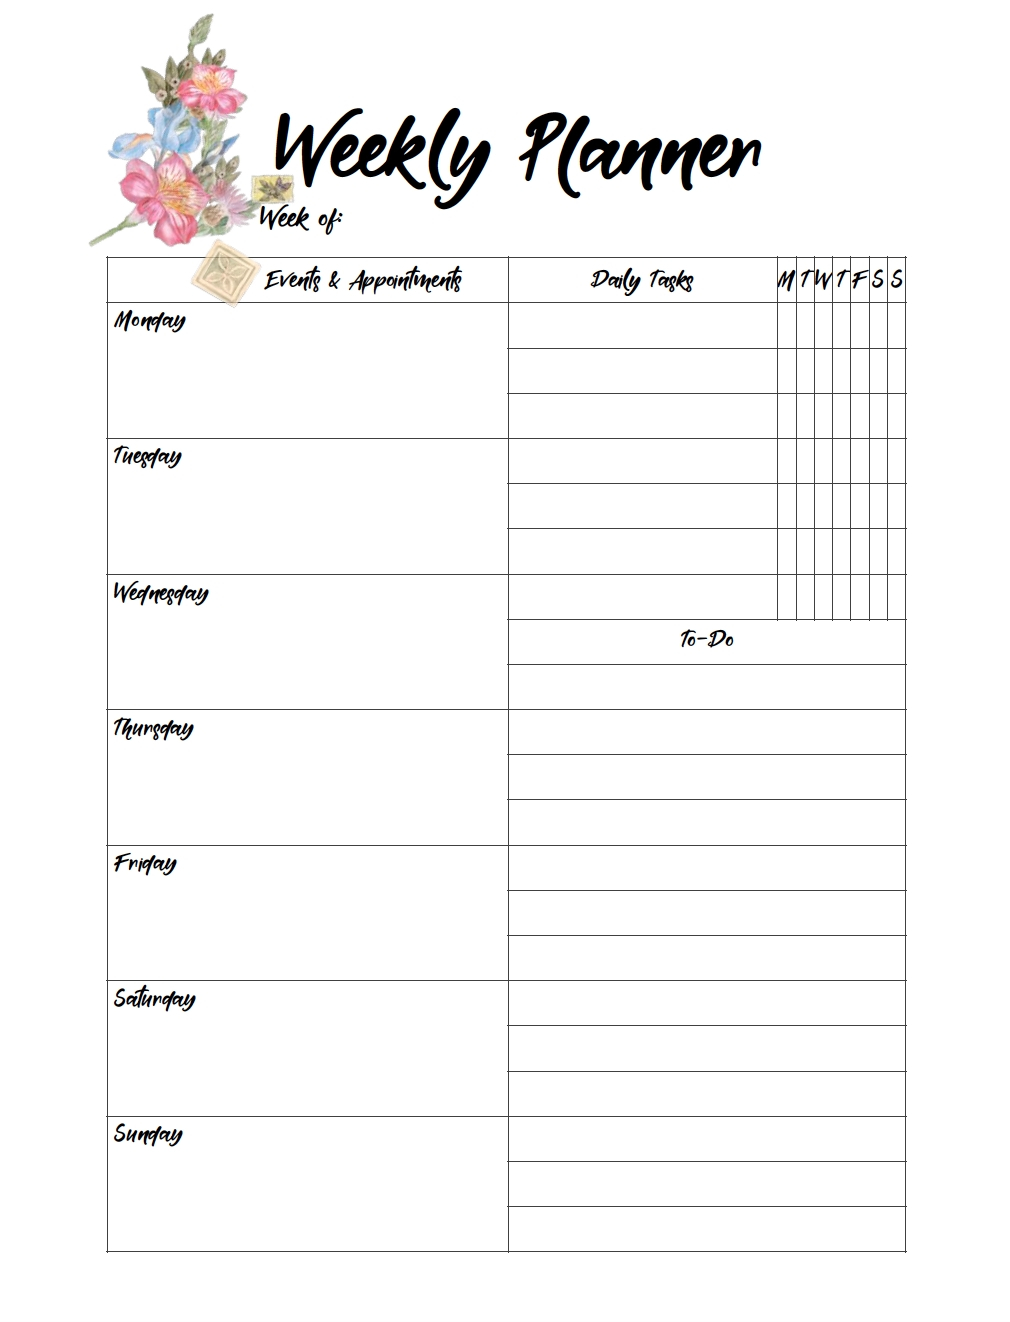 Monday Through Friday Planner Template  Calendar Inspiration Design throughout On Monday To Friday